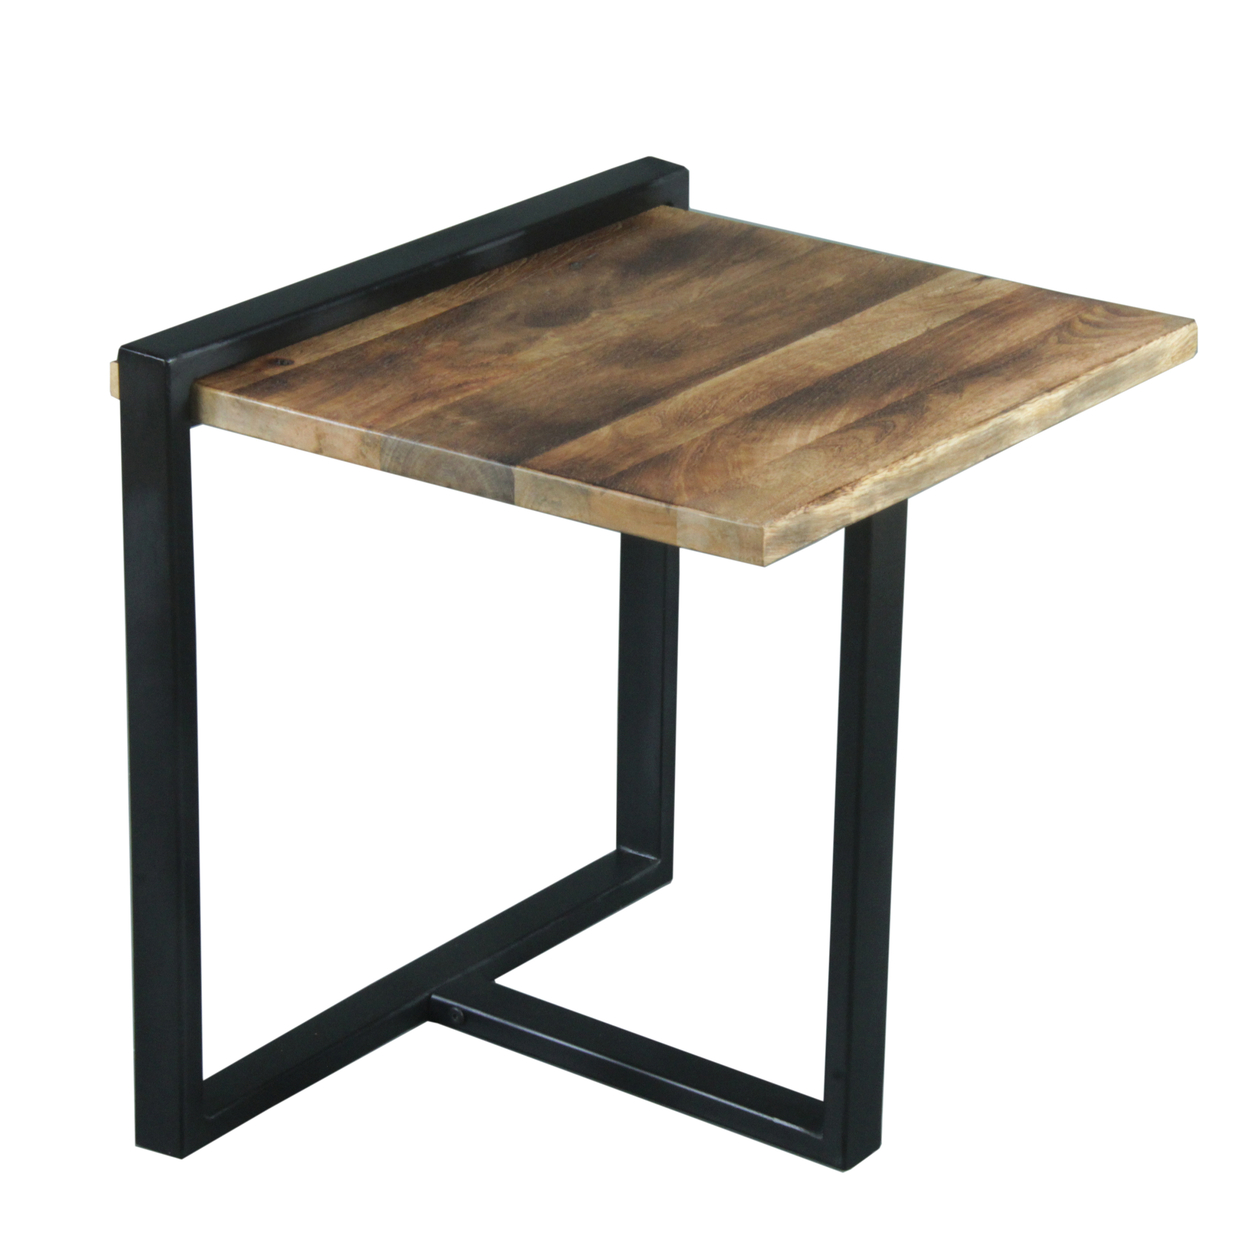 Industrial Minimalistic End Table With Mango Wood Top And Metal Frame, Brown And Black- Saltoro Sherpi